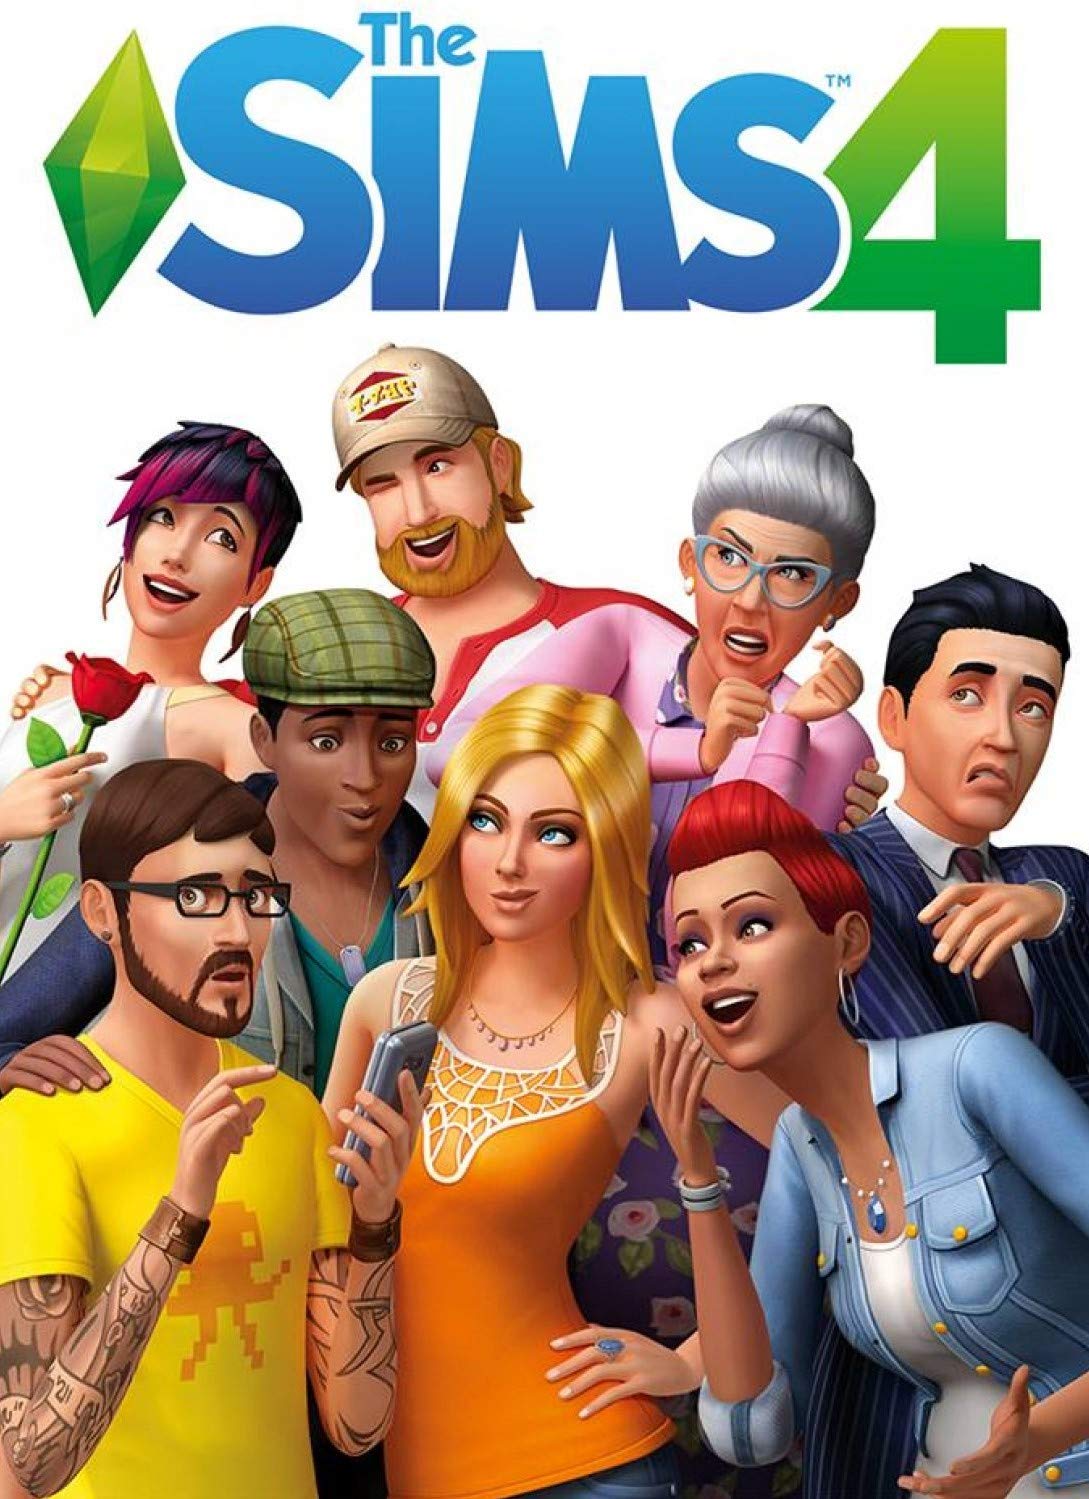 games for mac sims